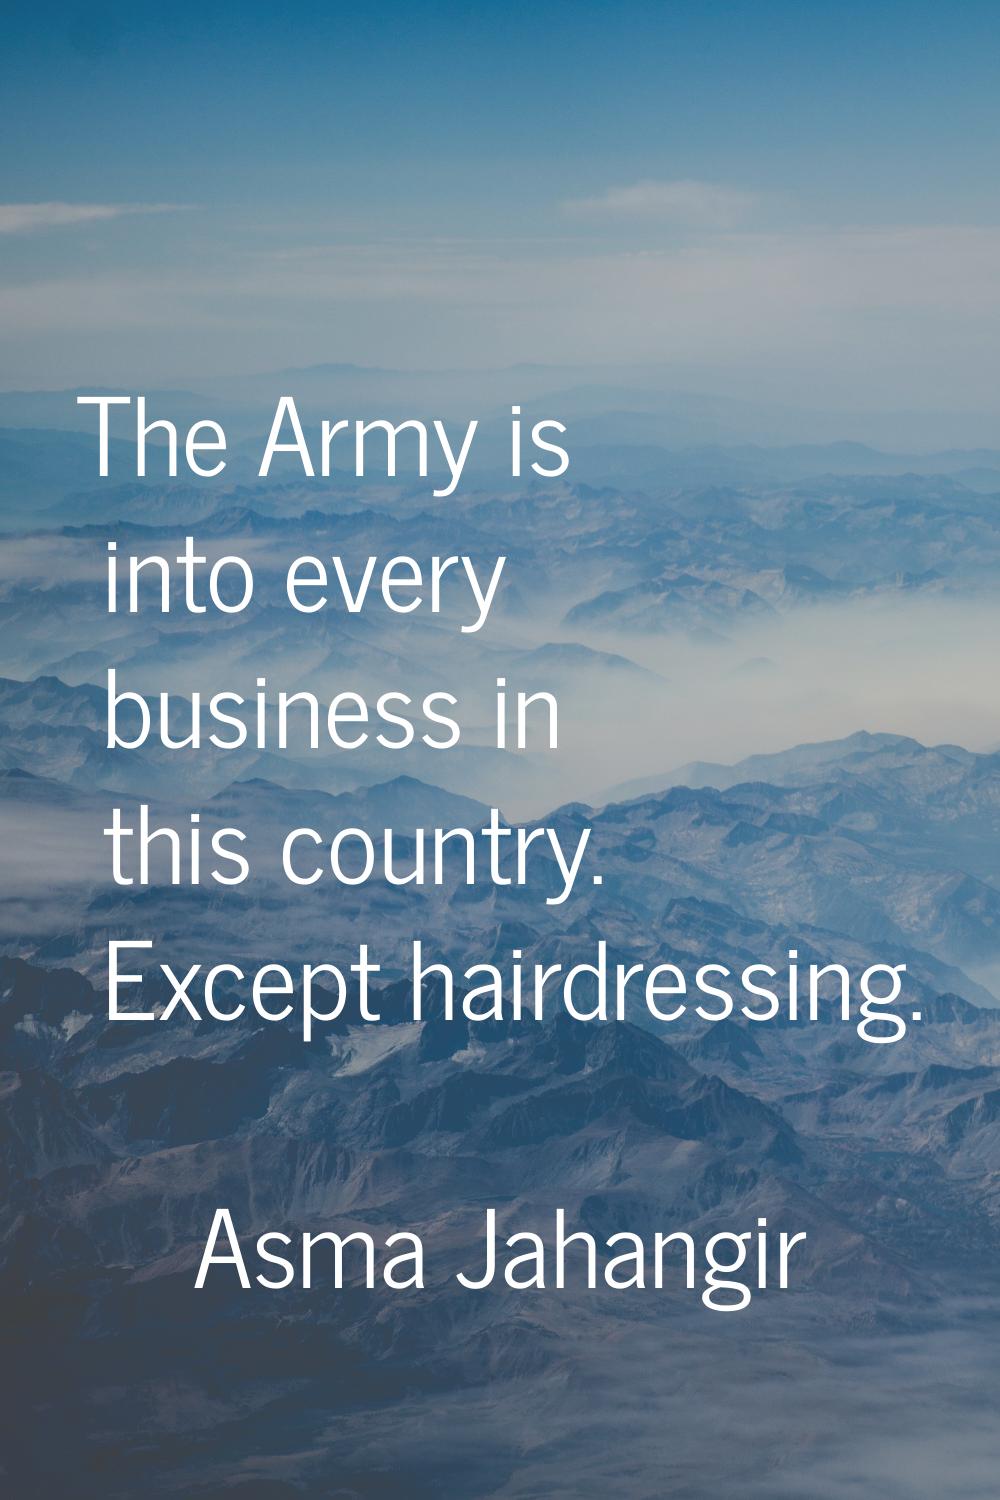 The Army is into every business in this country. Except hairdressing.